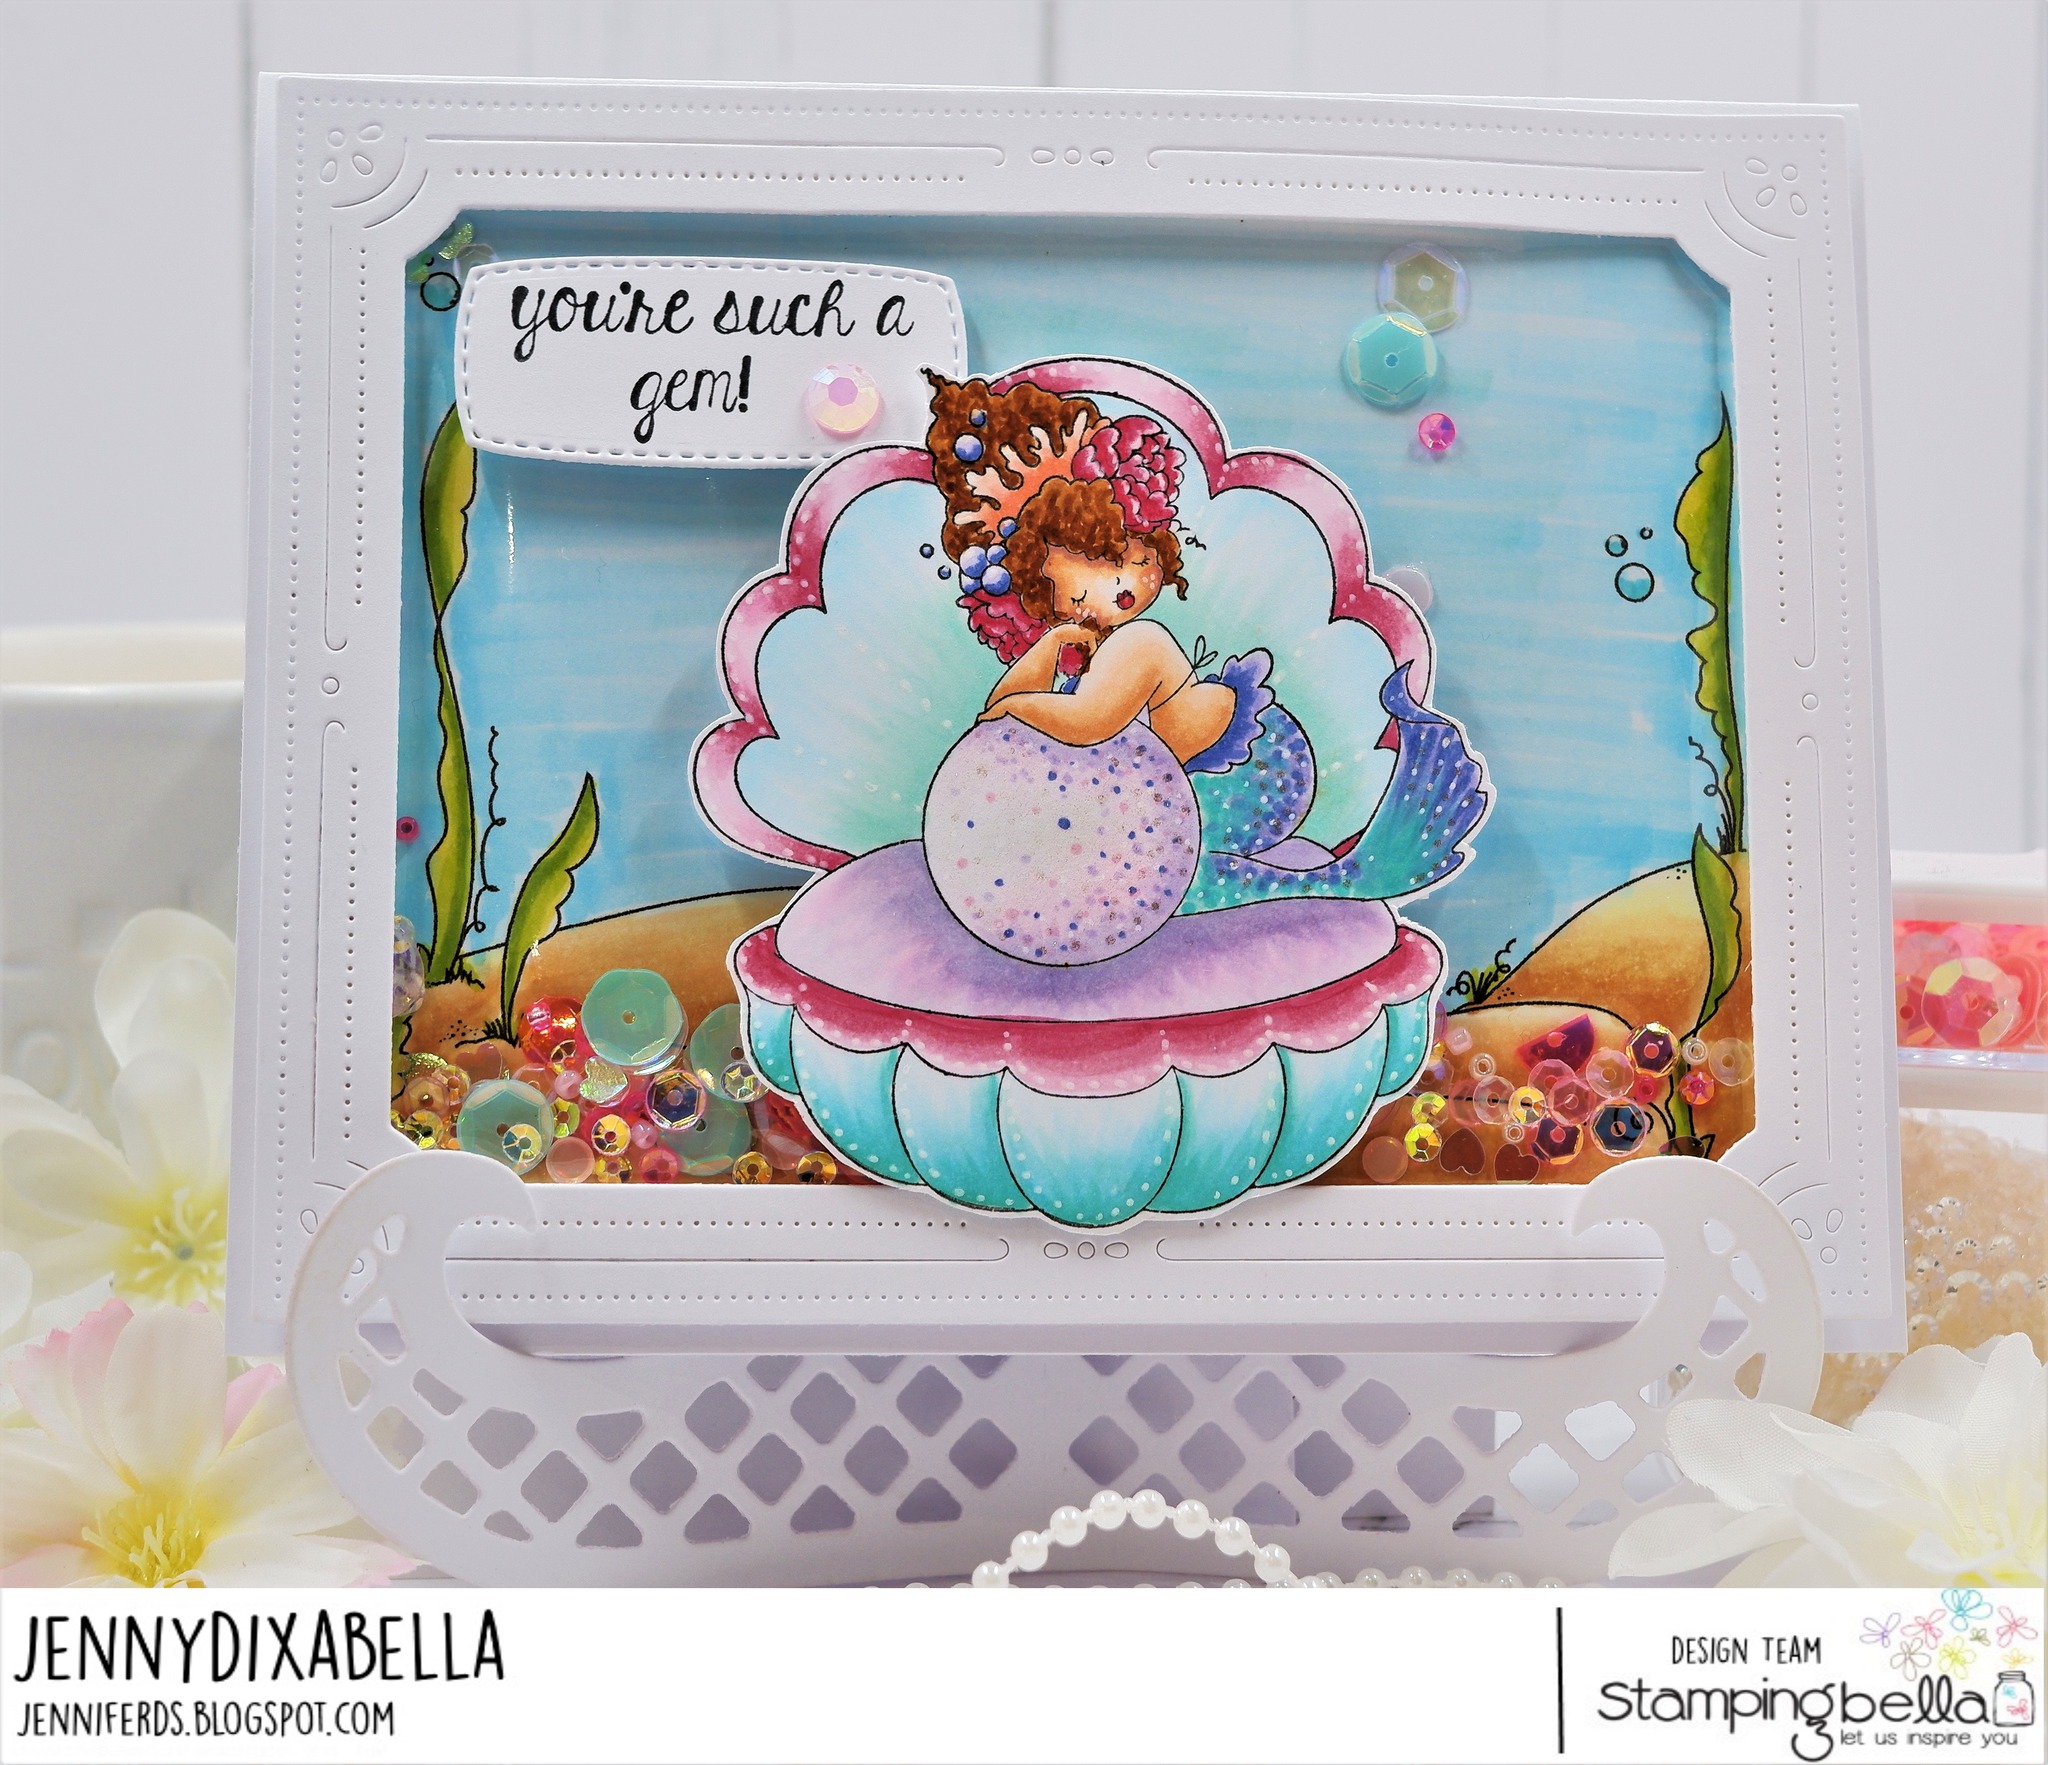 www.stampingbella.com: rubber stamp used: UNDER THE SEA BACKDROP and EDNA IN A CLAM card by Jenny Dix